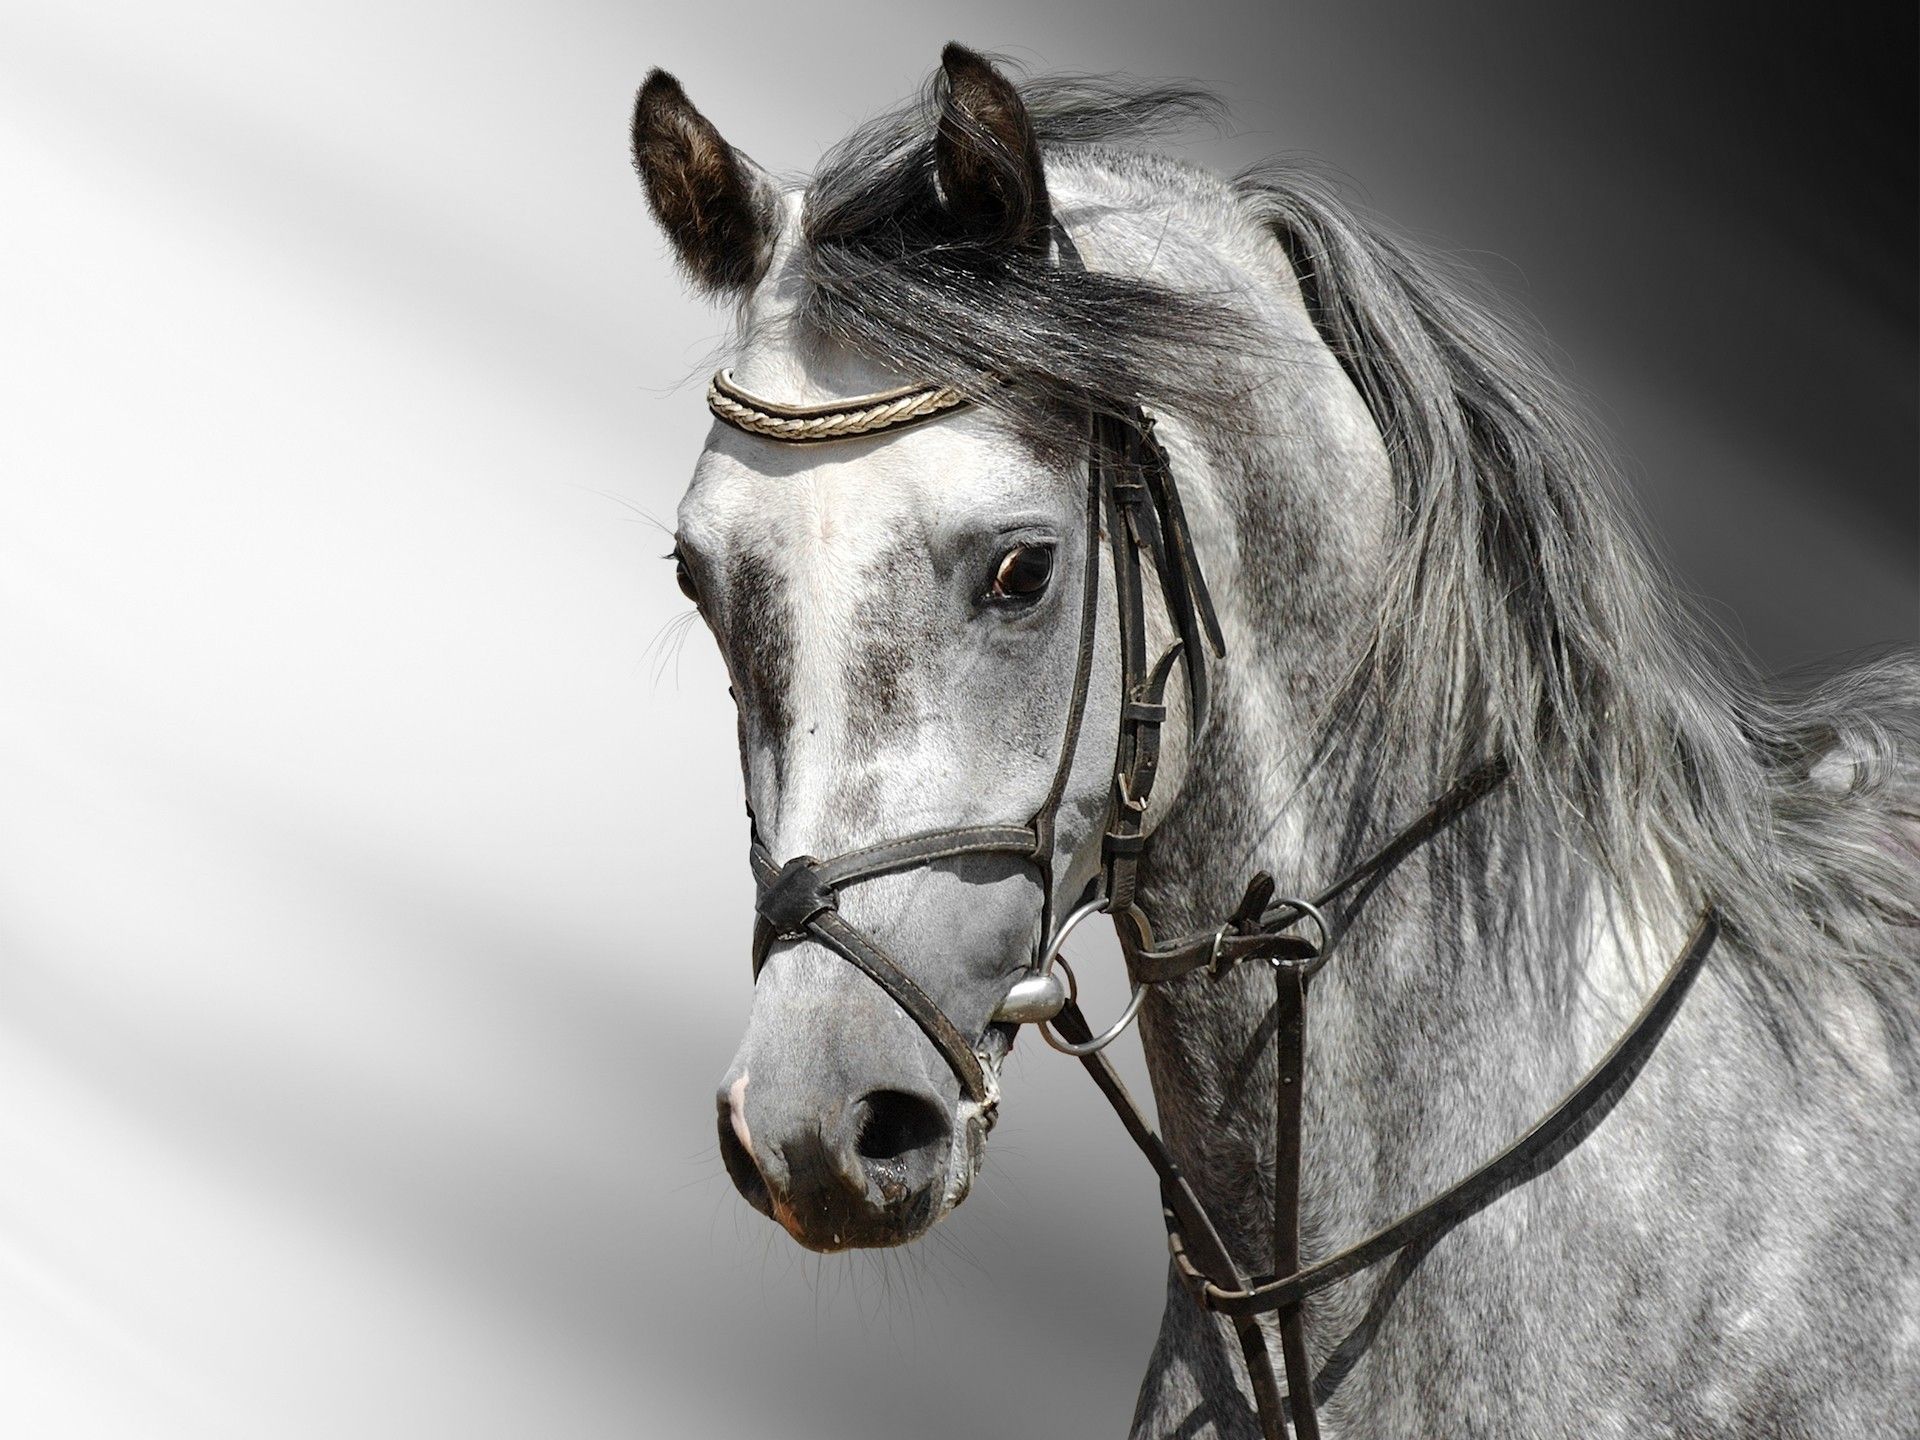 Horse Wallpaper HD Picture One HD Wallpaper Picture 1920×1440 Horse Wallpaper HD (48 Wallpaper). Adorable Wallp. Horse wallpaper, Horses, Dapple grey horses